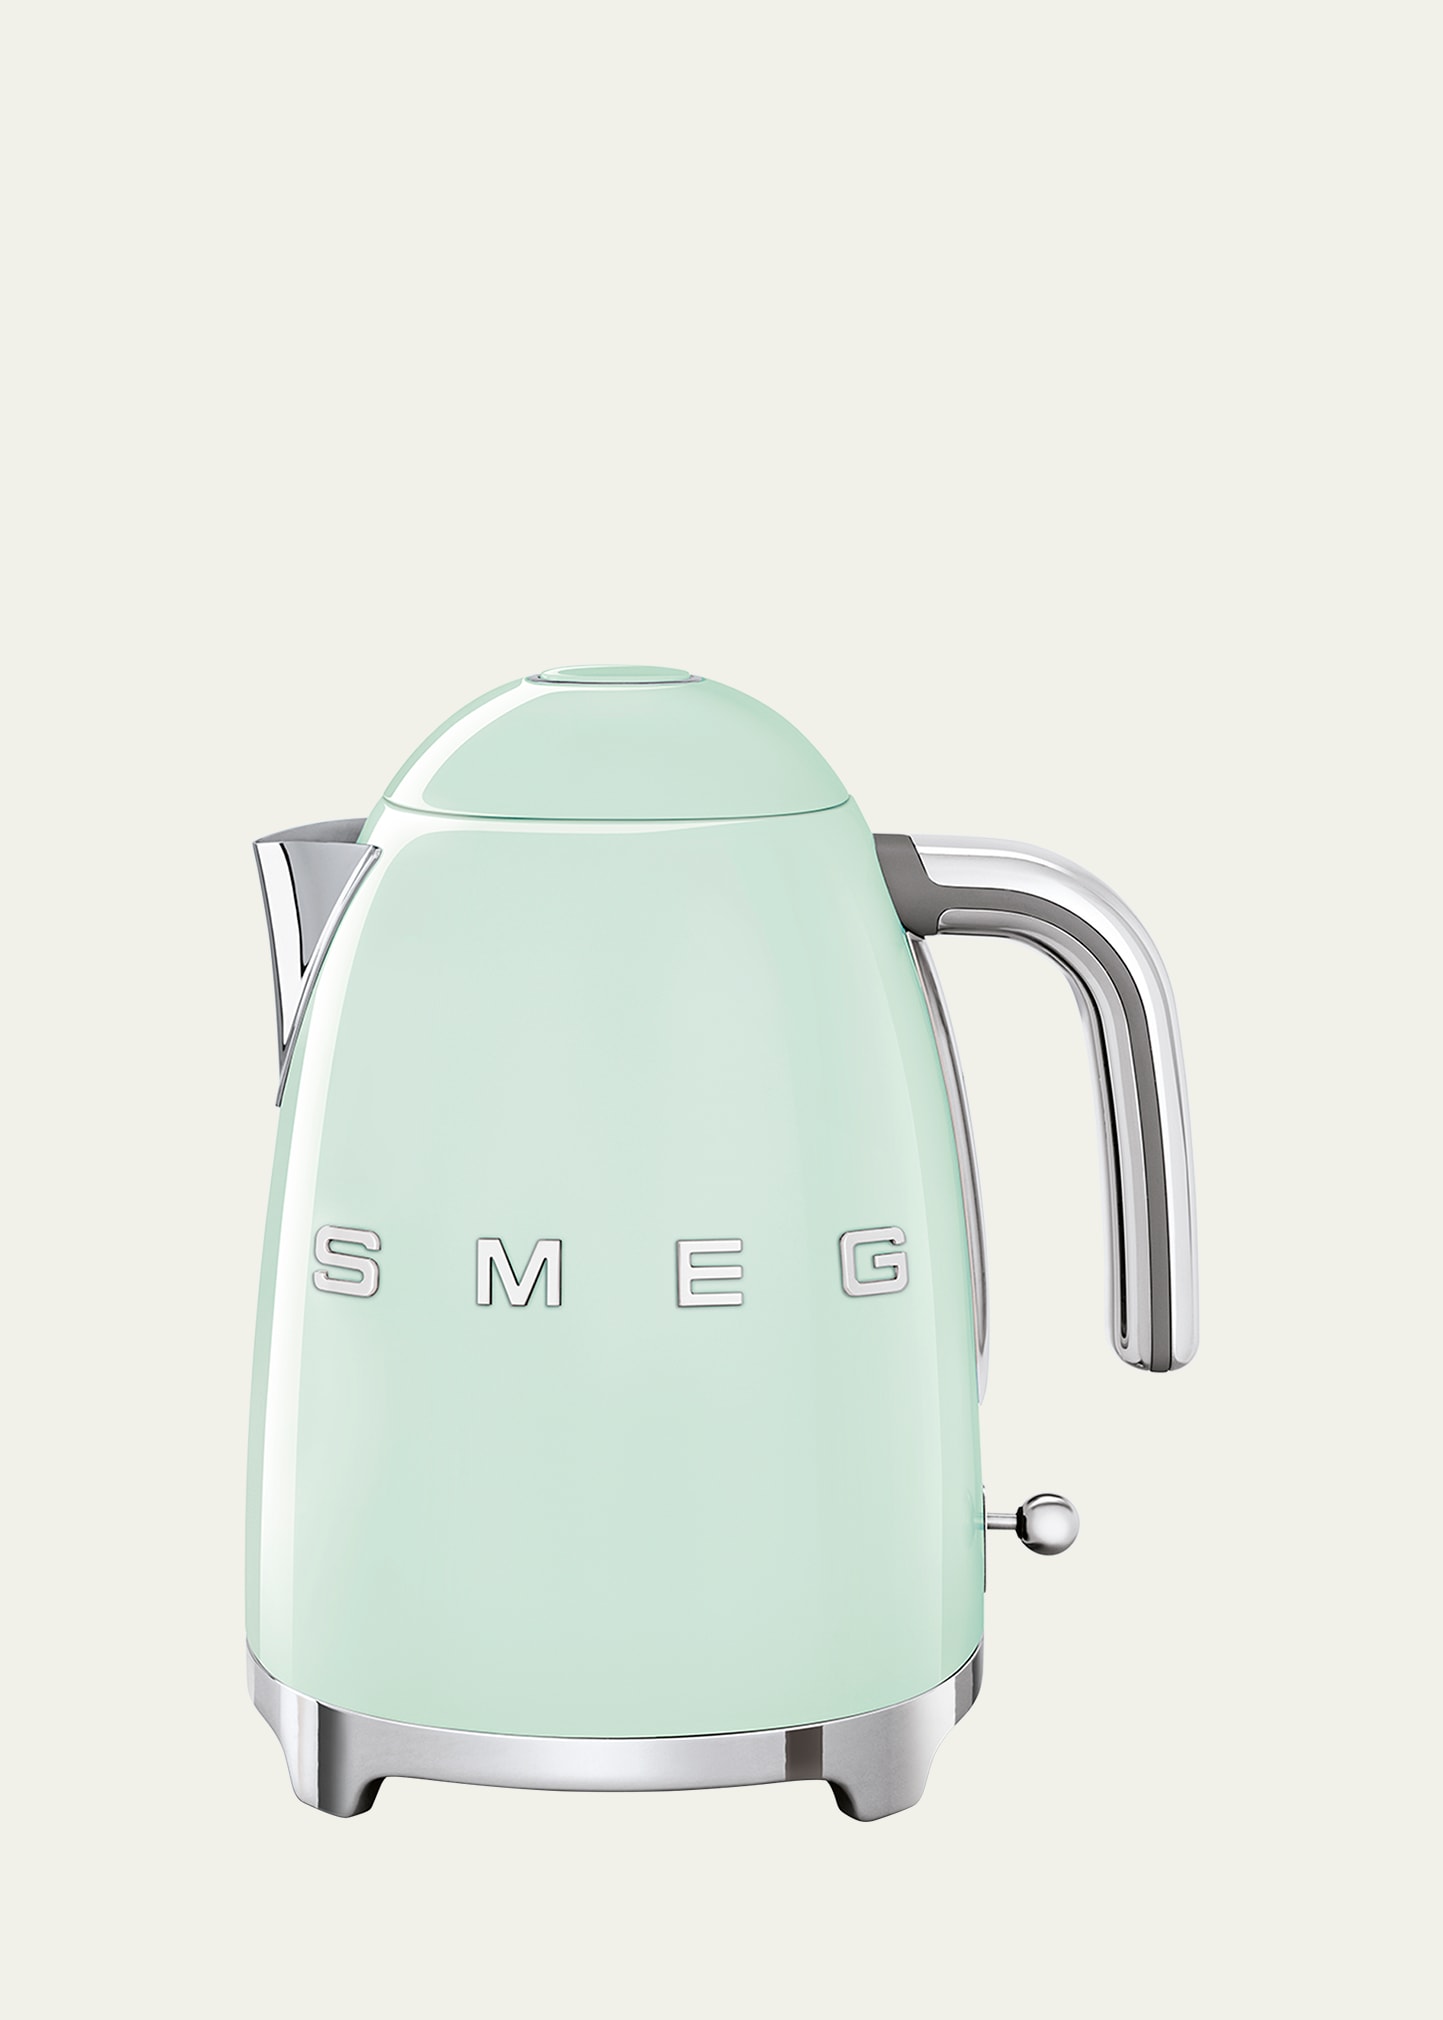 Smeg Retro Electric Kettle, Polished White In Pastel Green